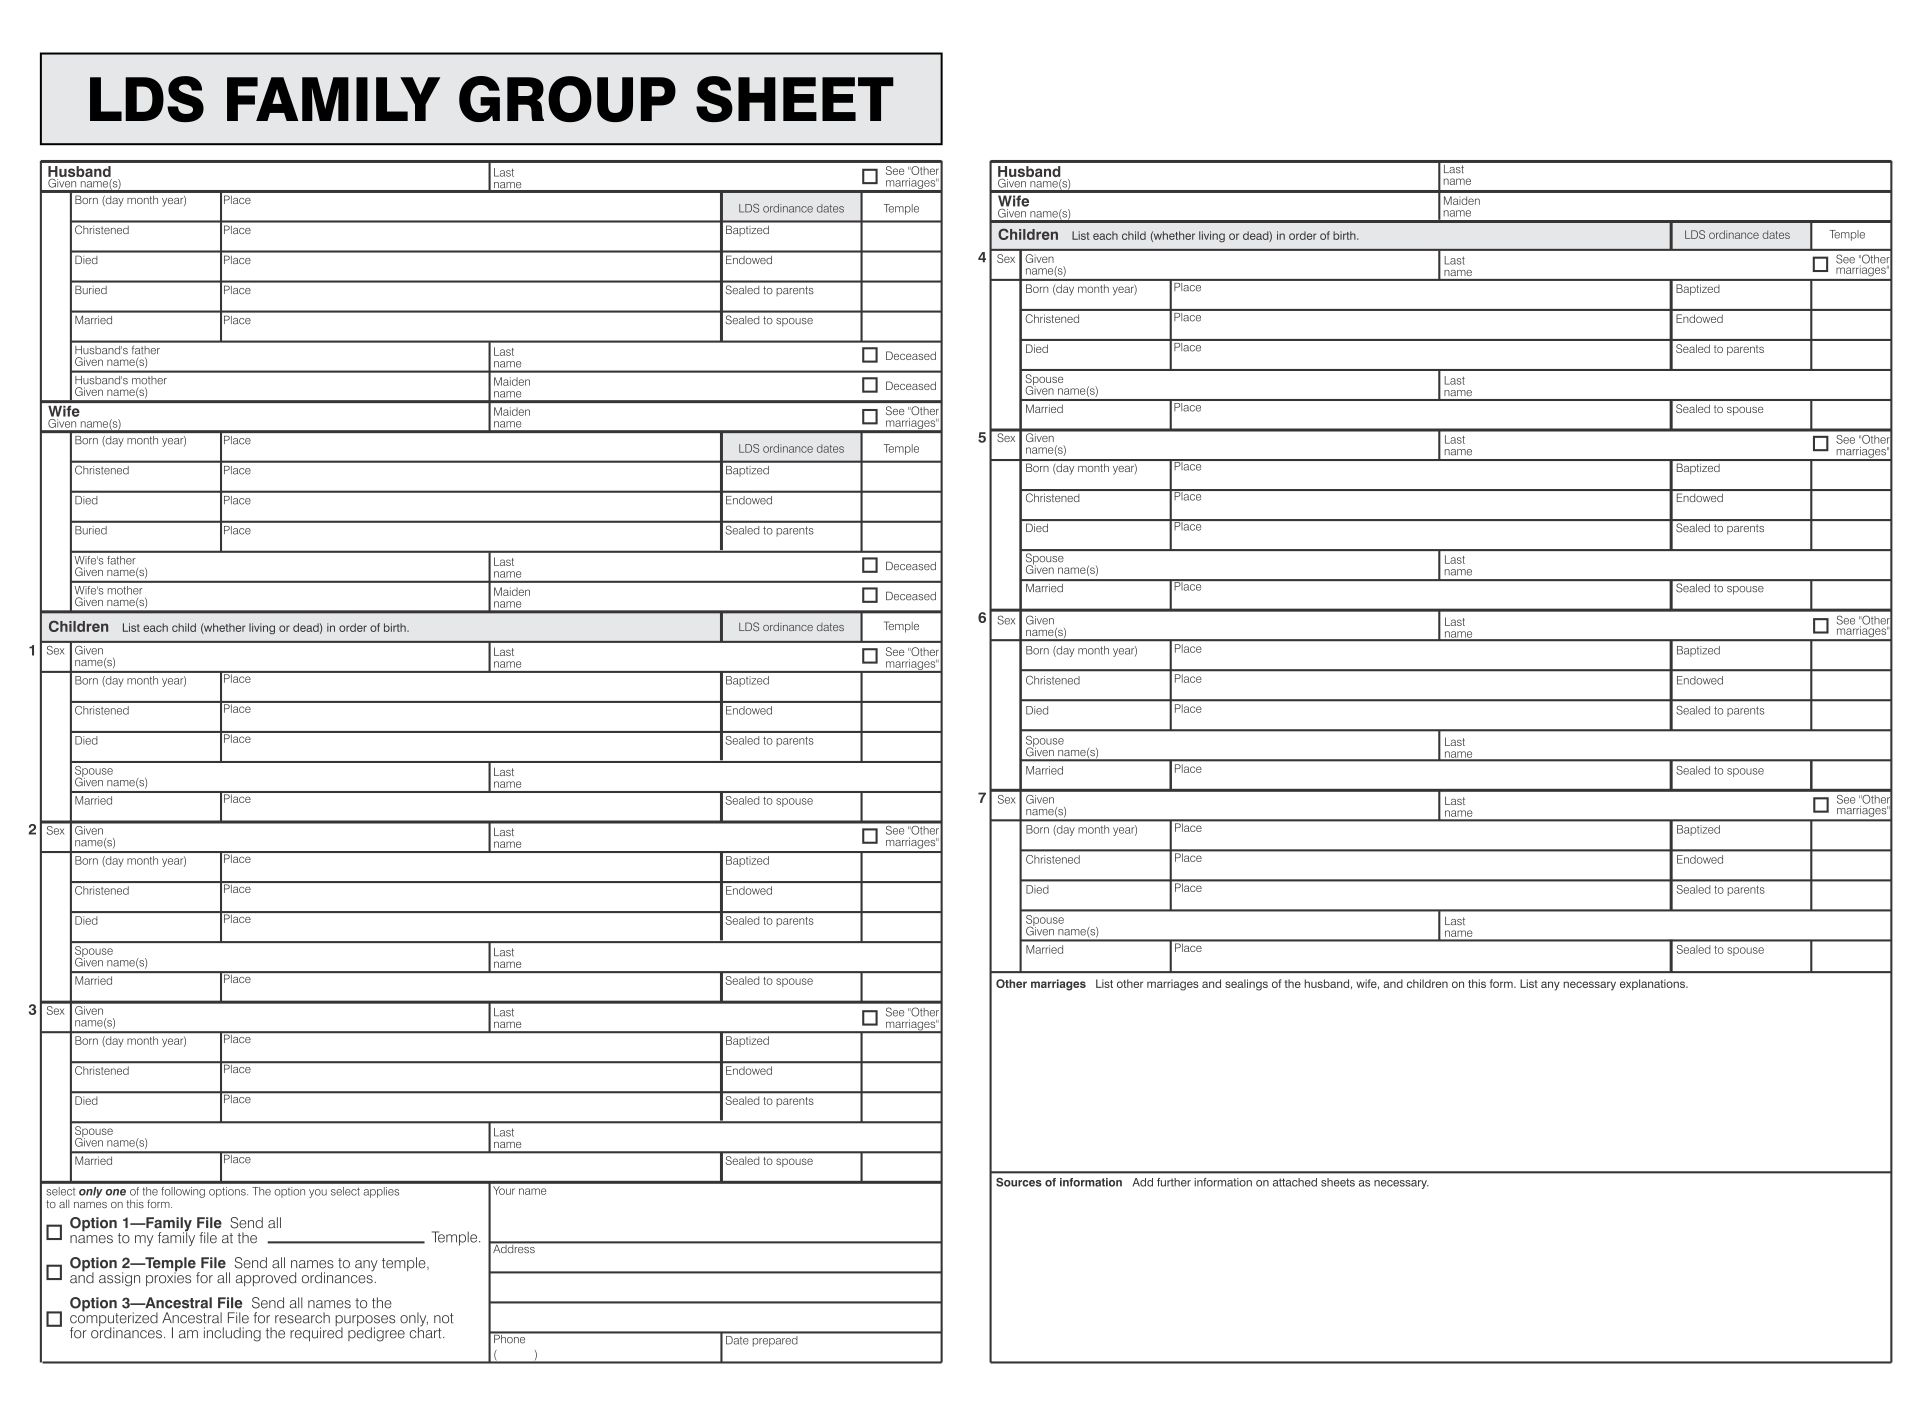 4-best-images-of-free-printable-group-sheets-free-blank-family-group-sheets-lds-family-group